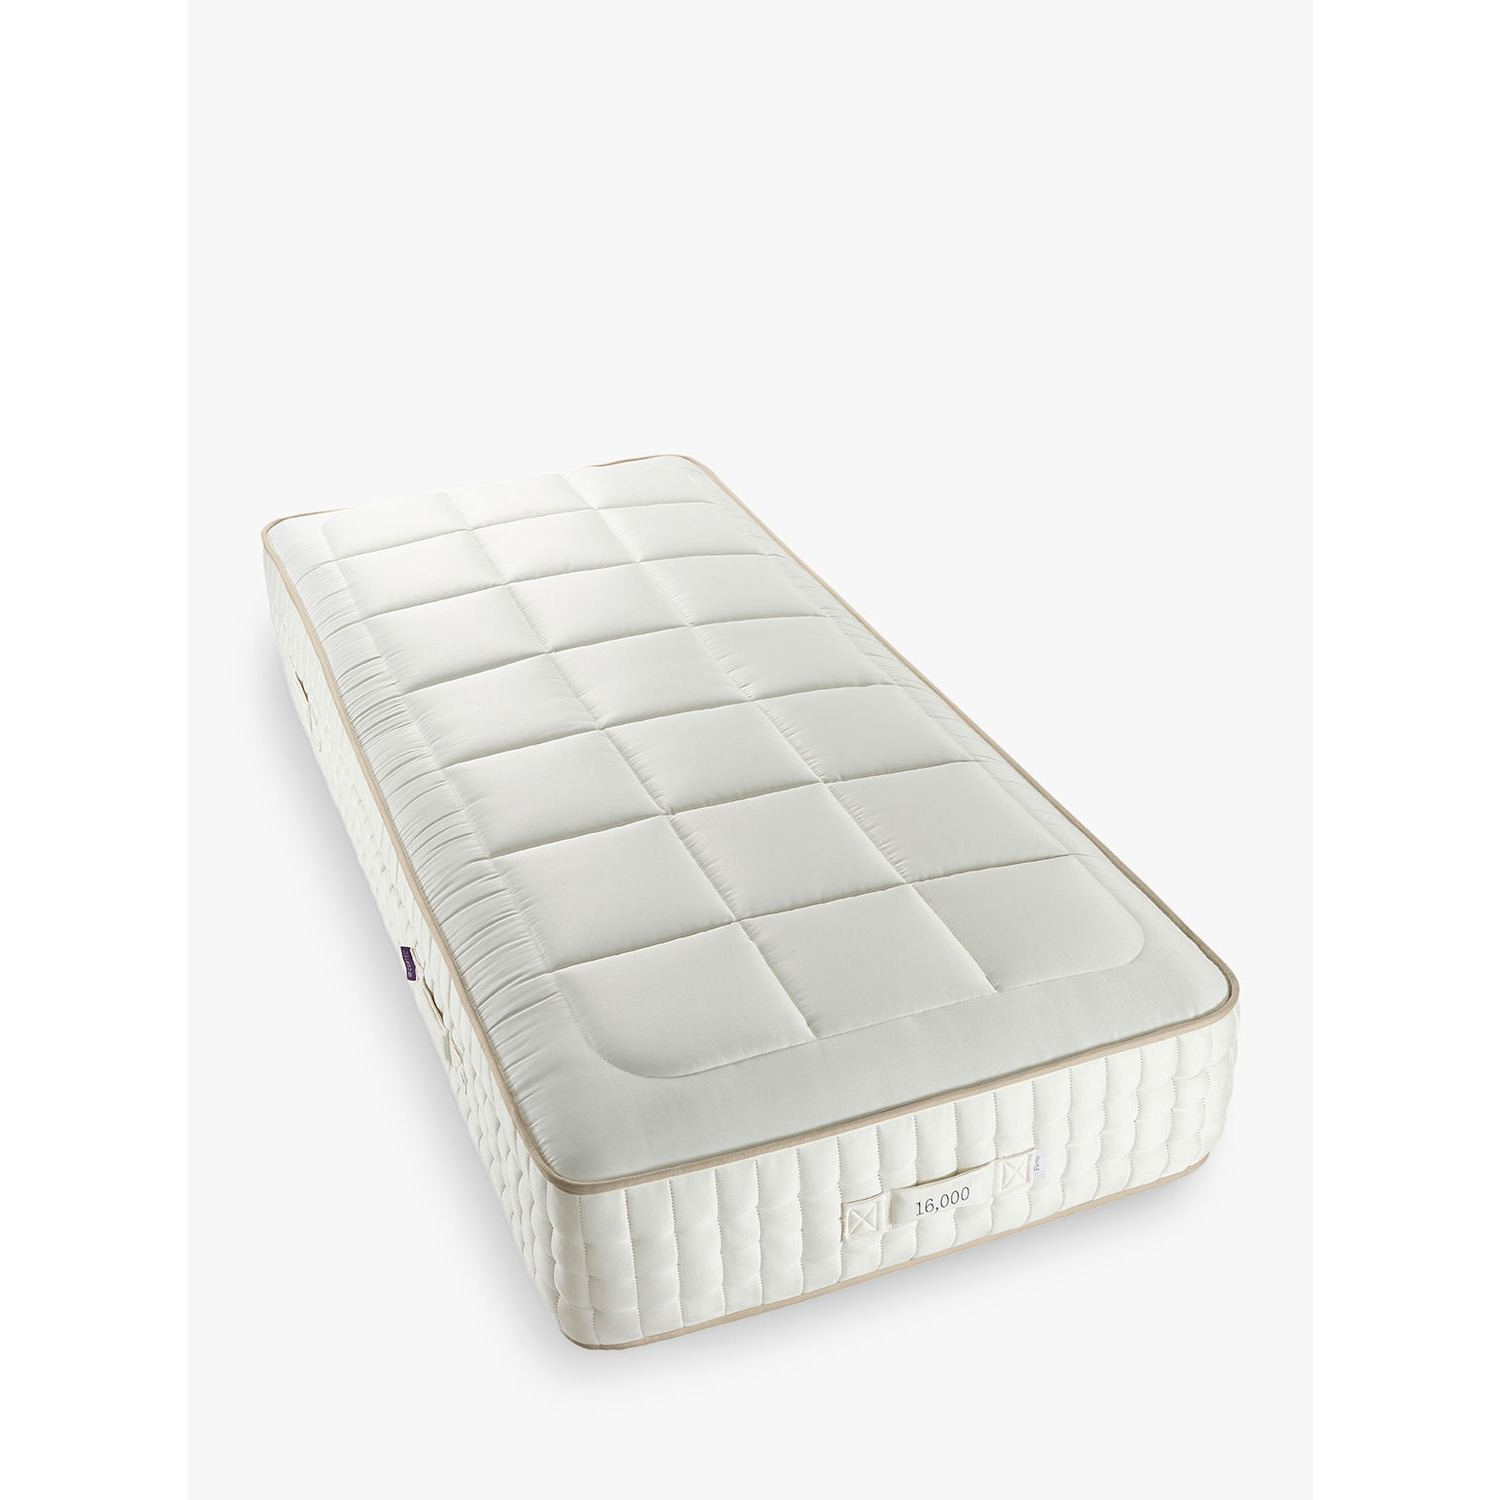 John Lewis Luxury Natural Collection Mohair Quilted 16000, Single, Firmer Tension Pocket Spring Mattress - image 1